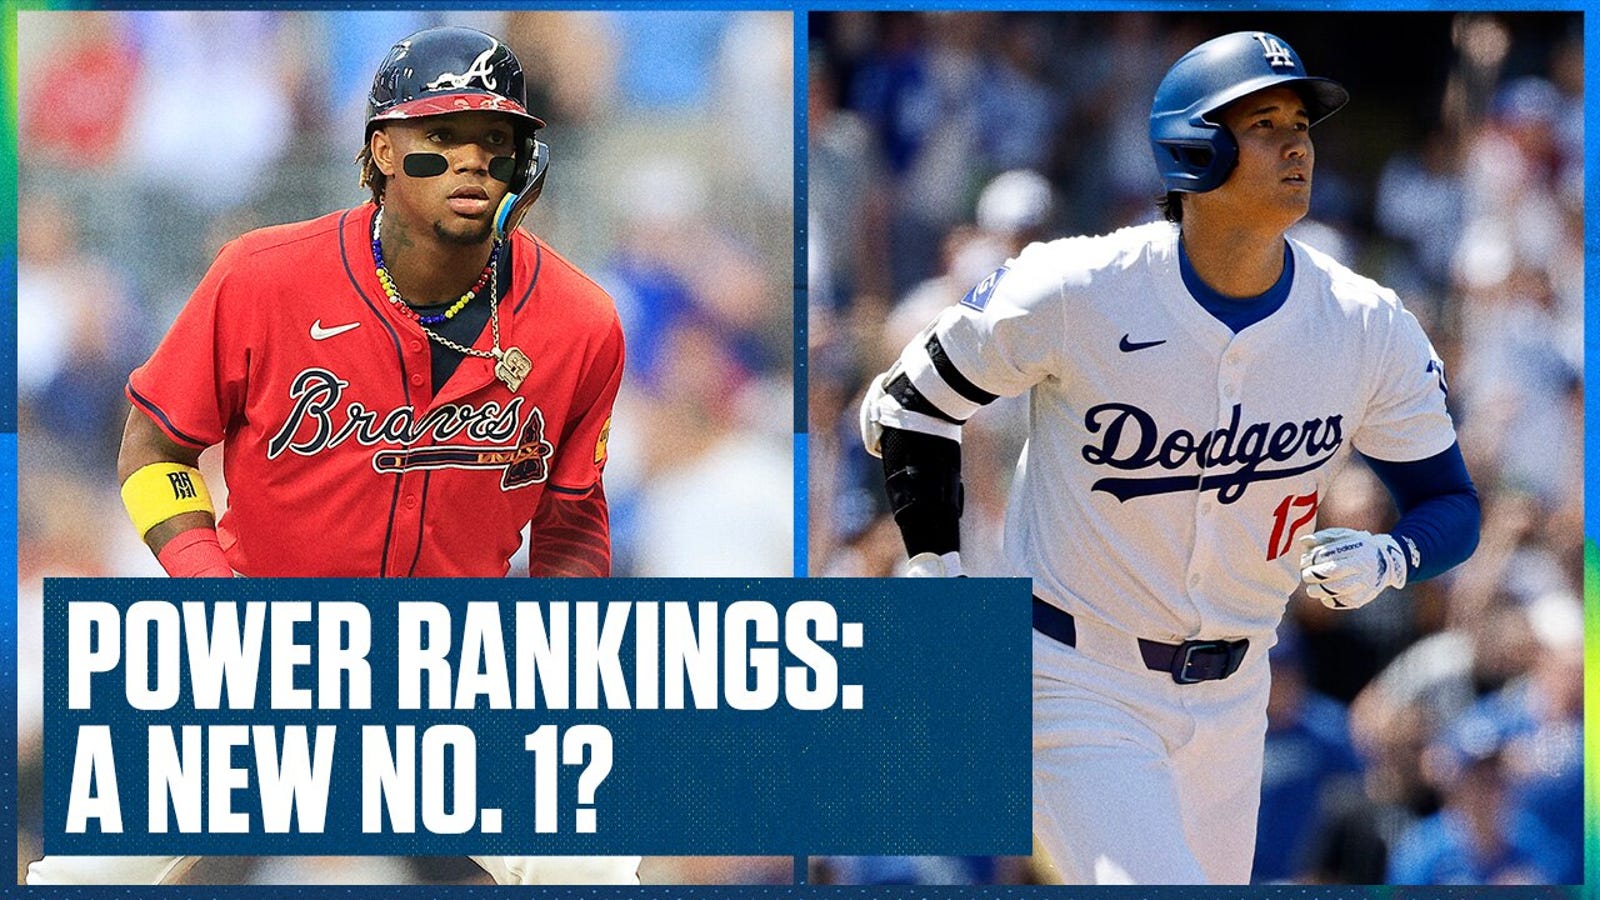 Who is the best team in MLB?